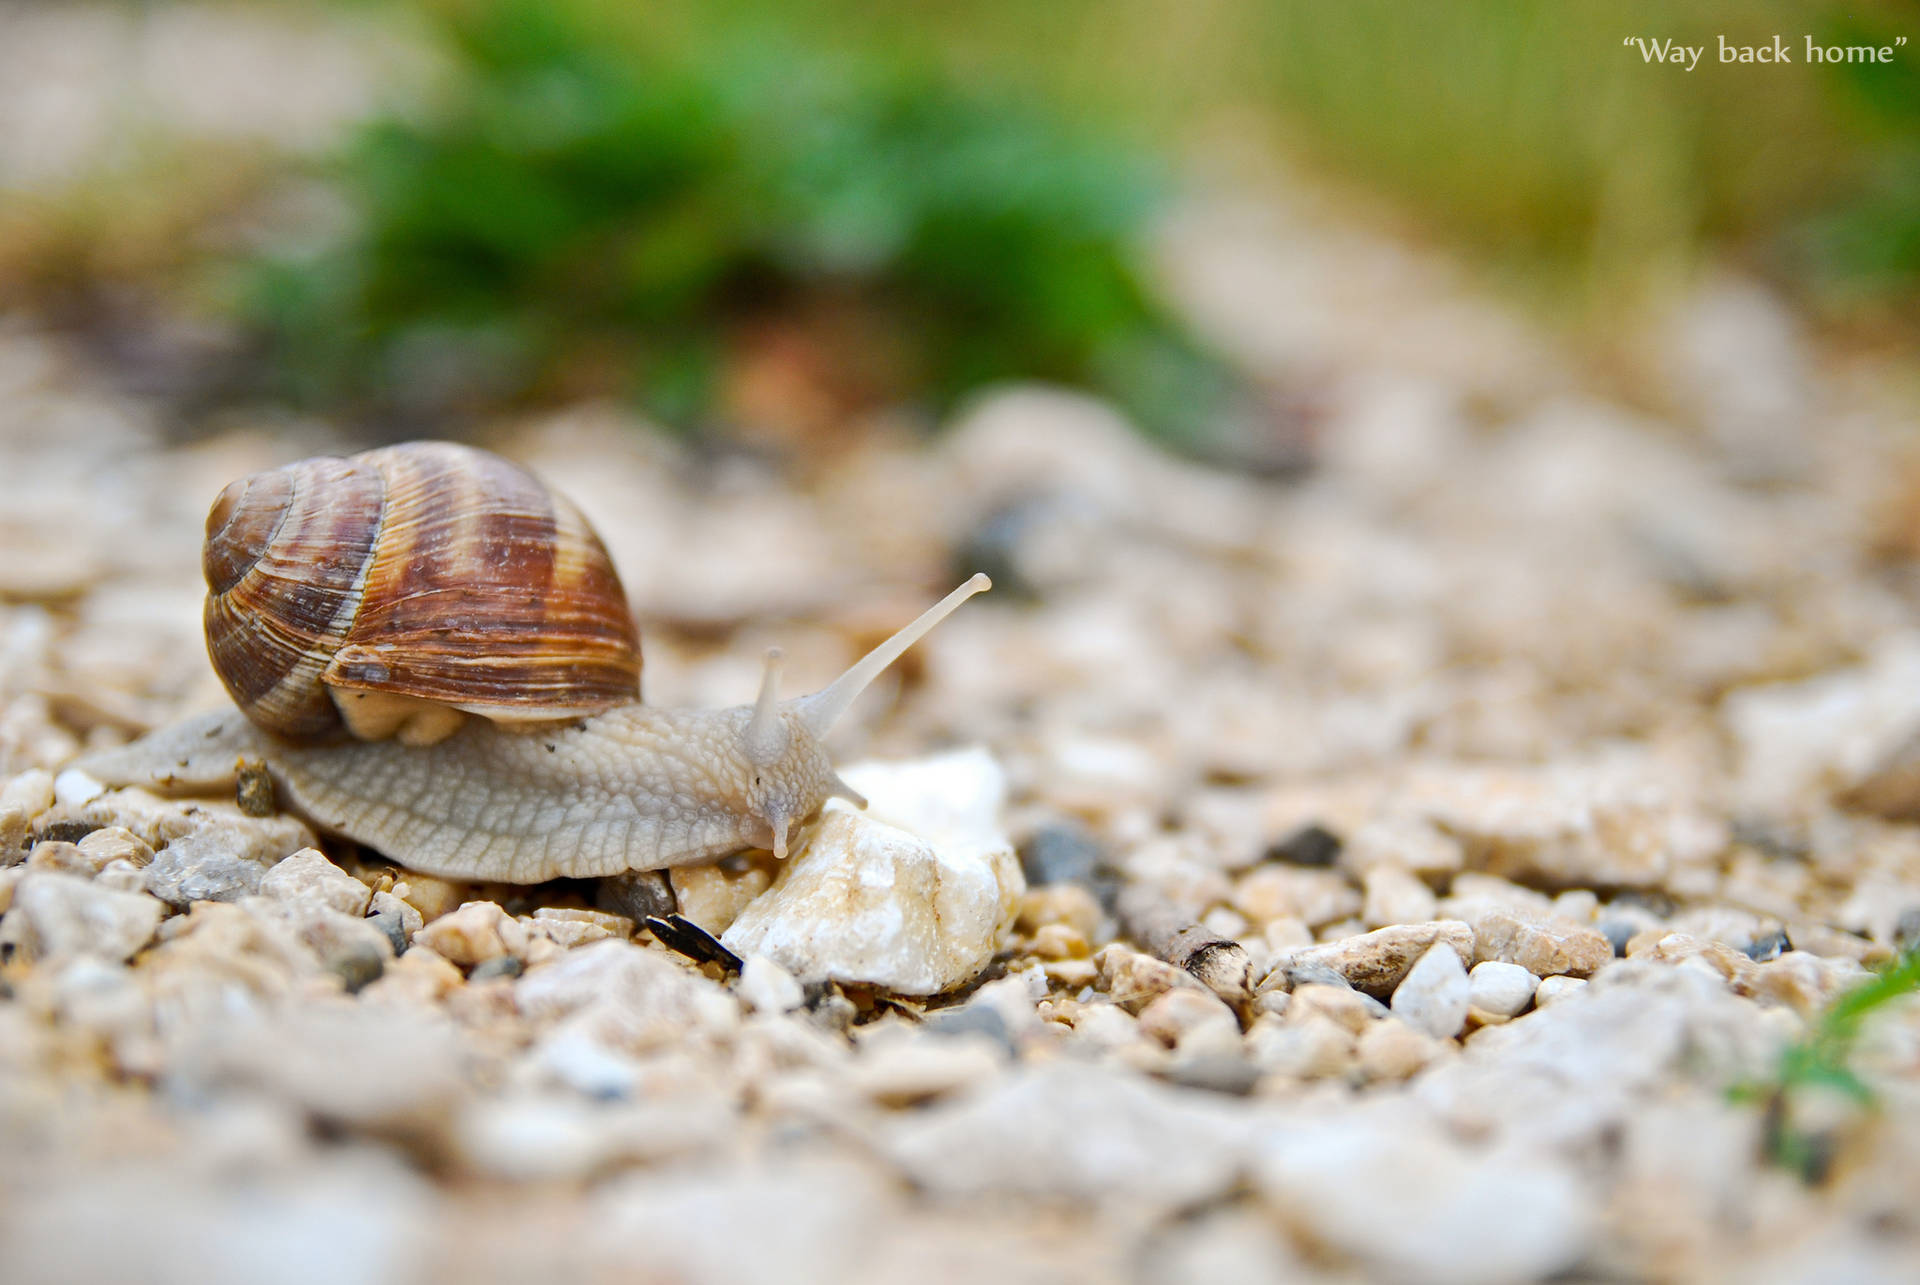 A Snail On A Pebbled Ground Background